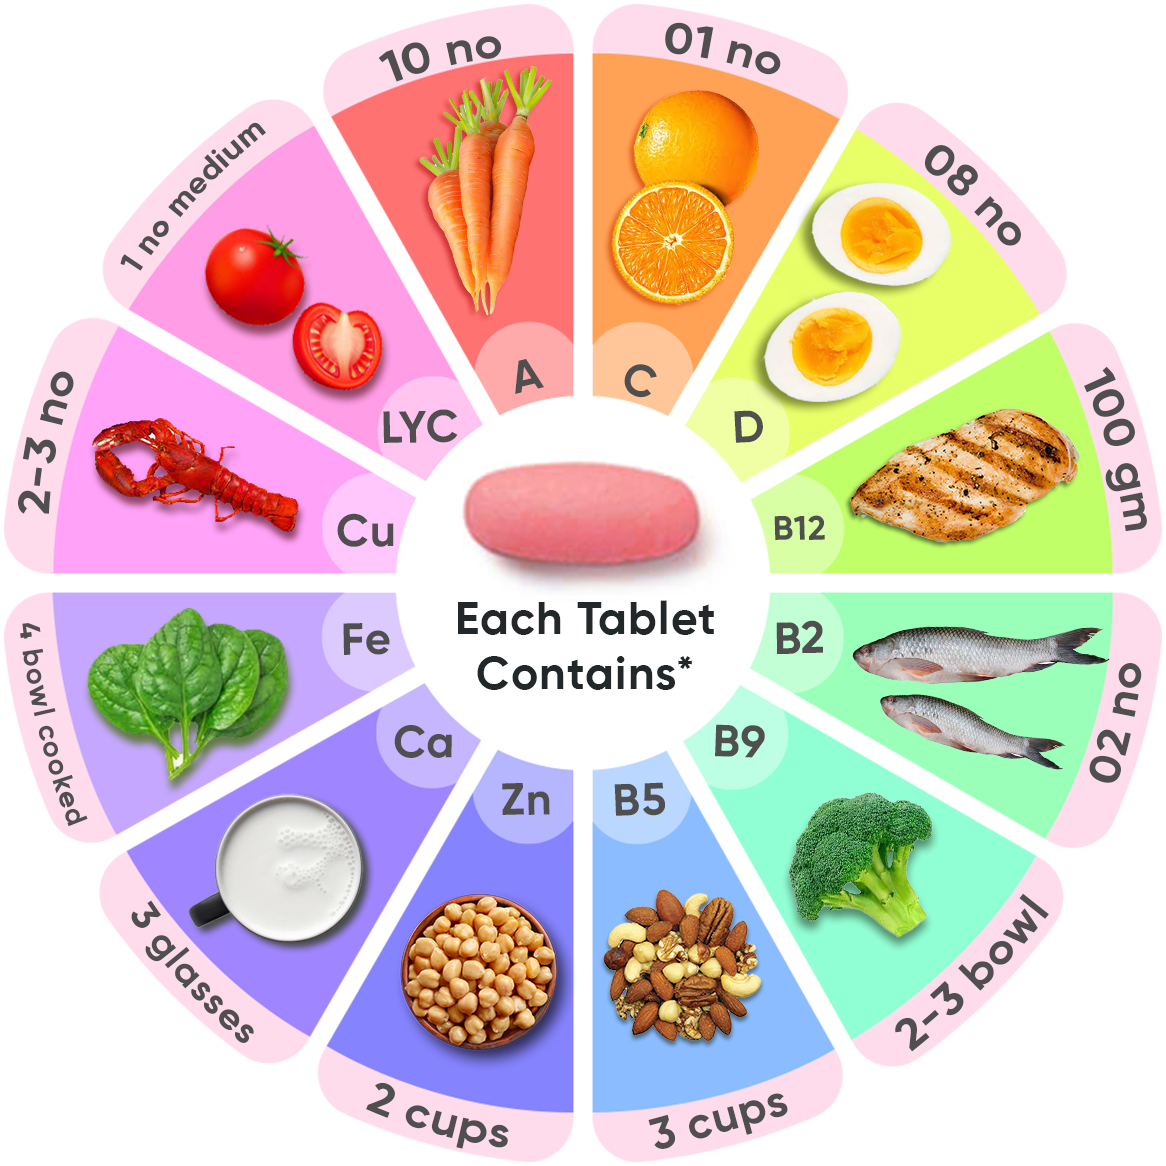 Each Tablets Contains